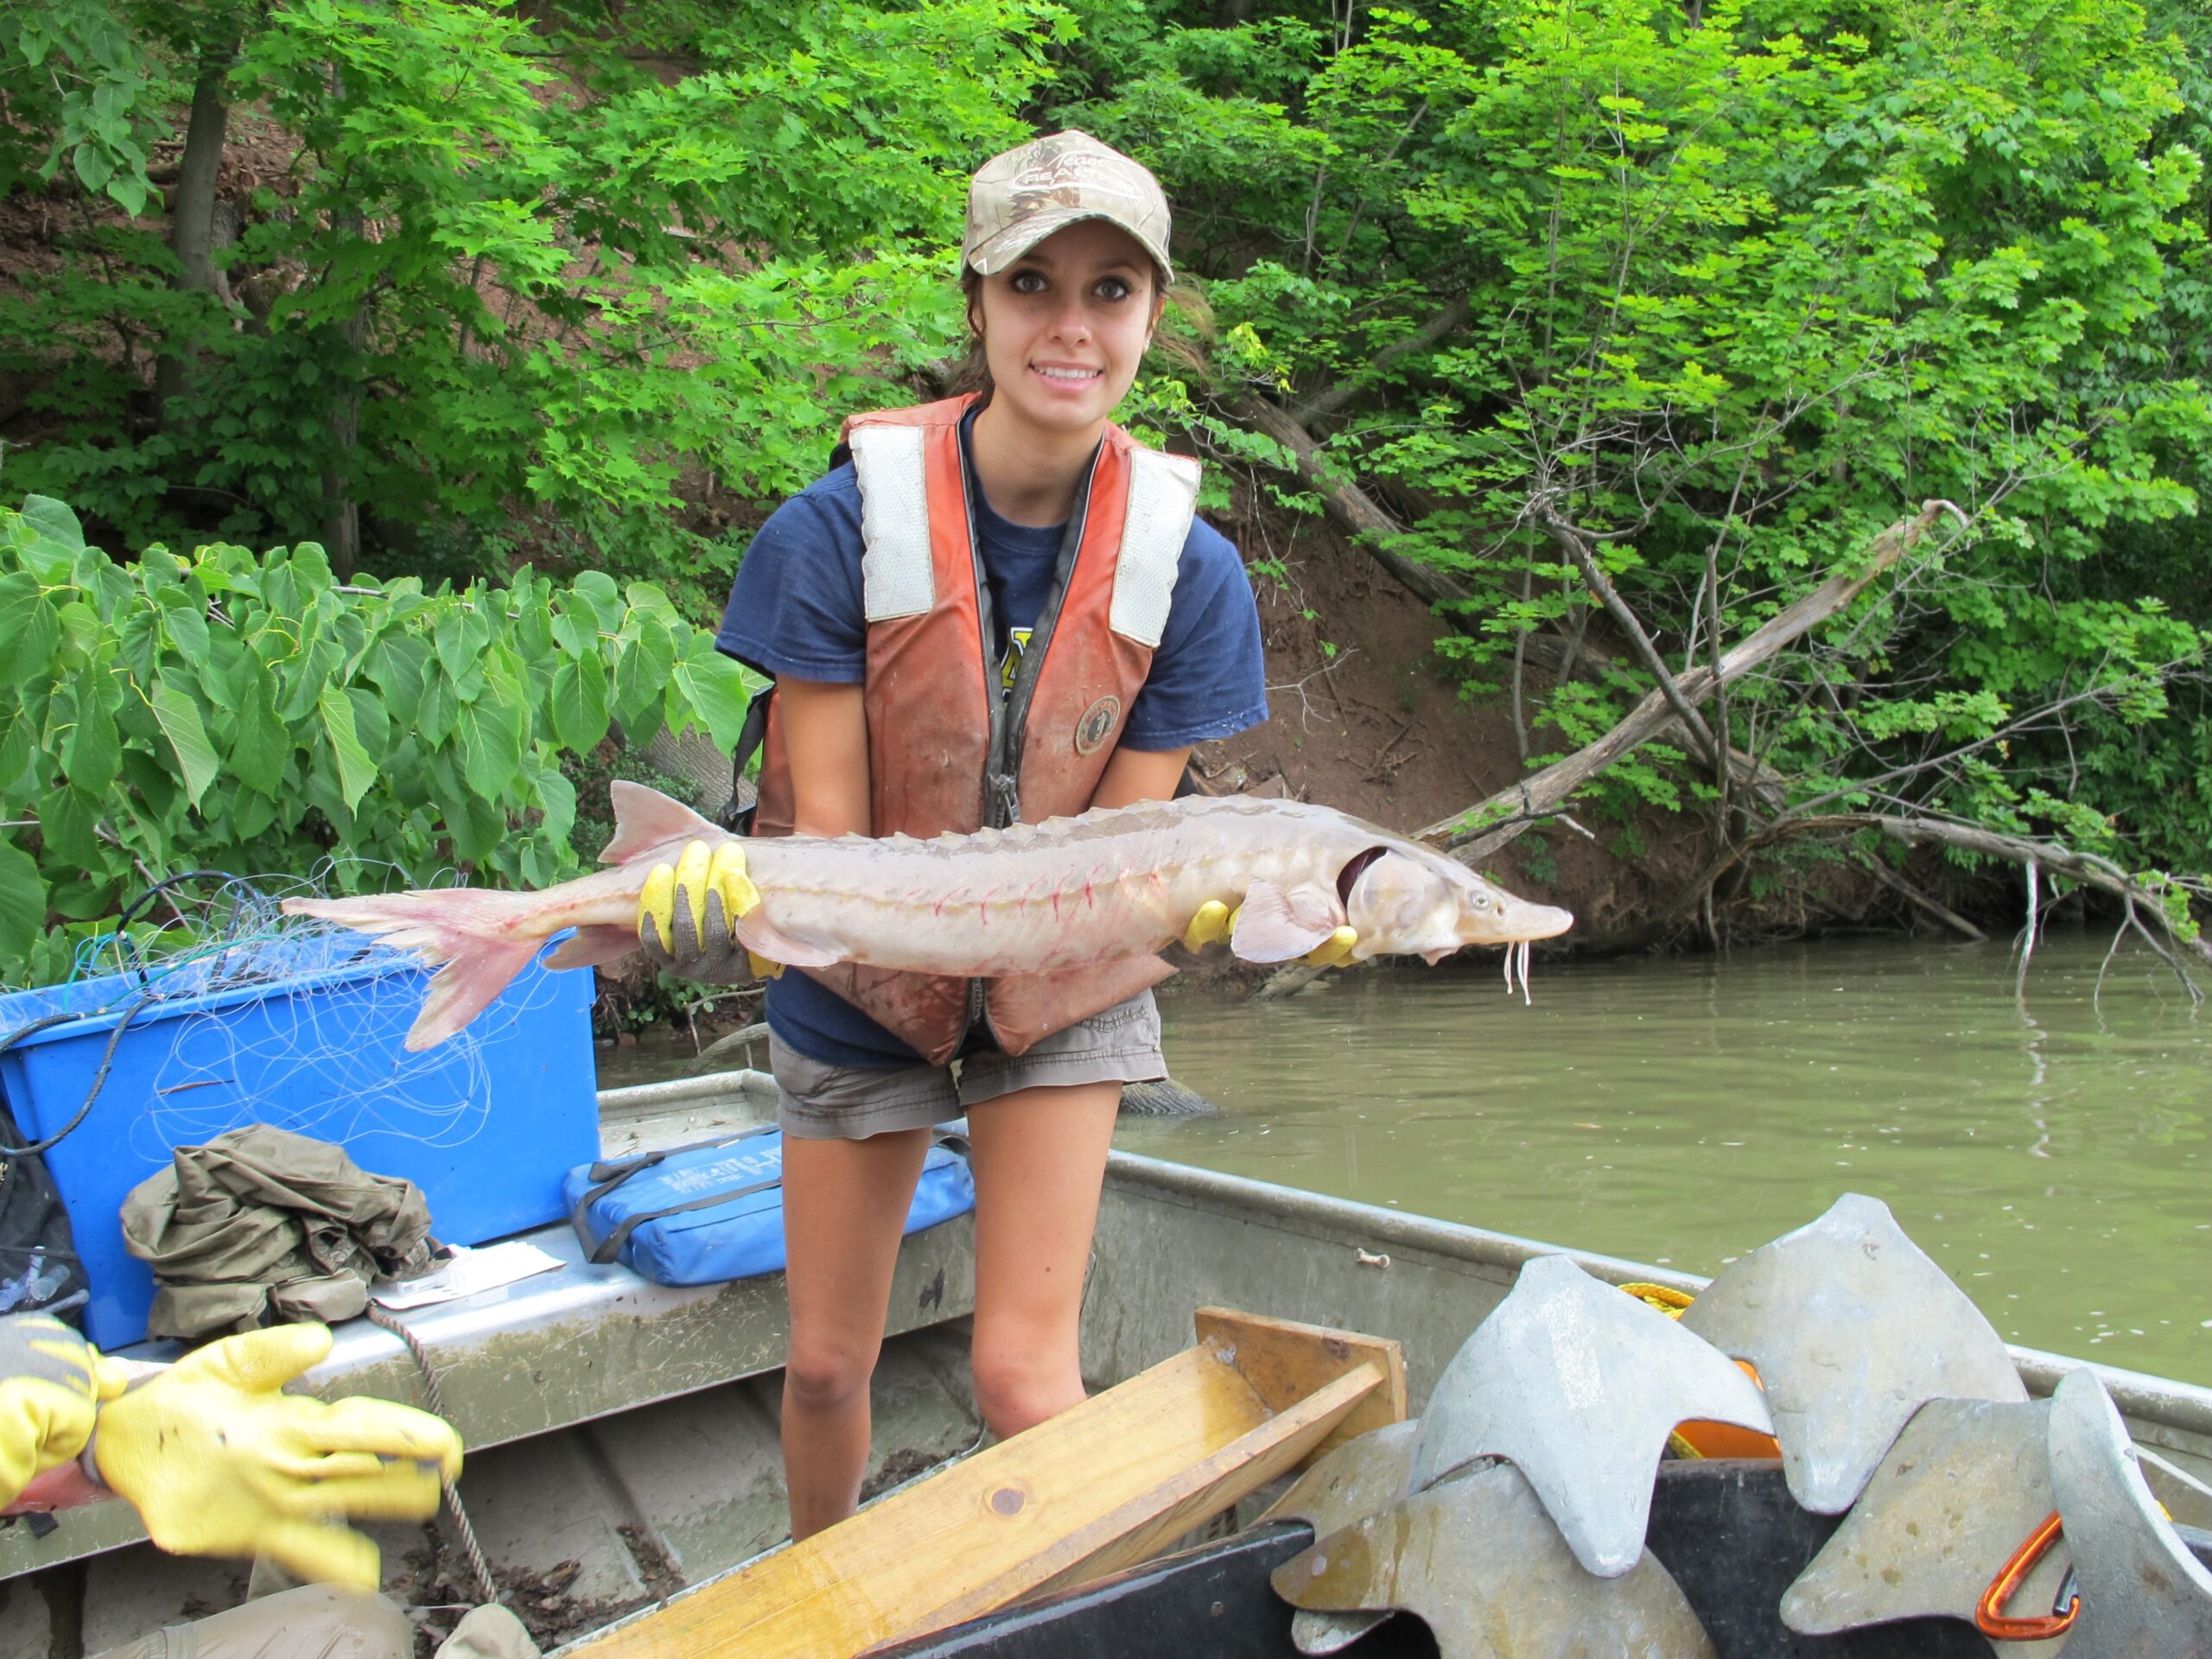 Sturgeon are thriving in the Mighty Genesee!